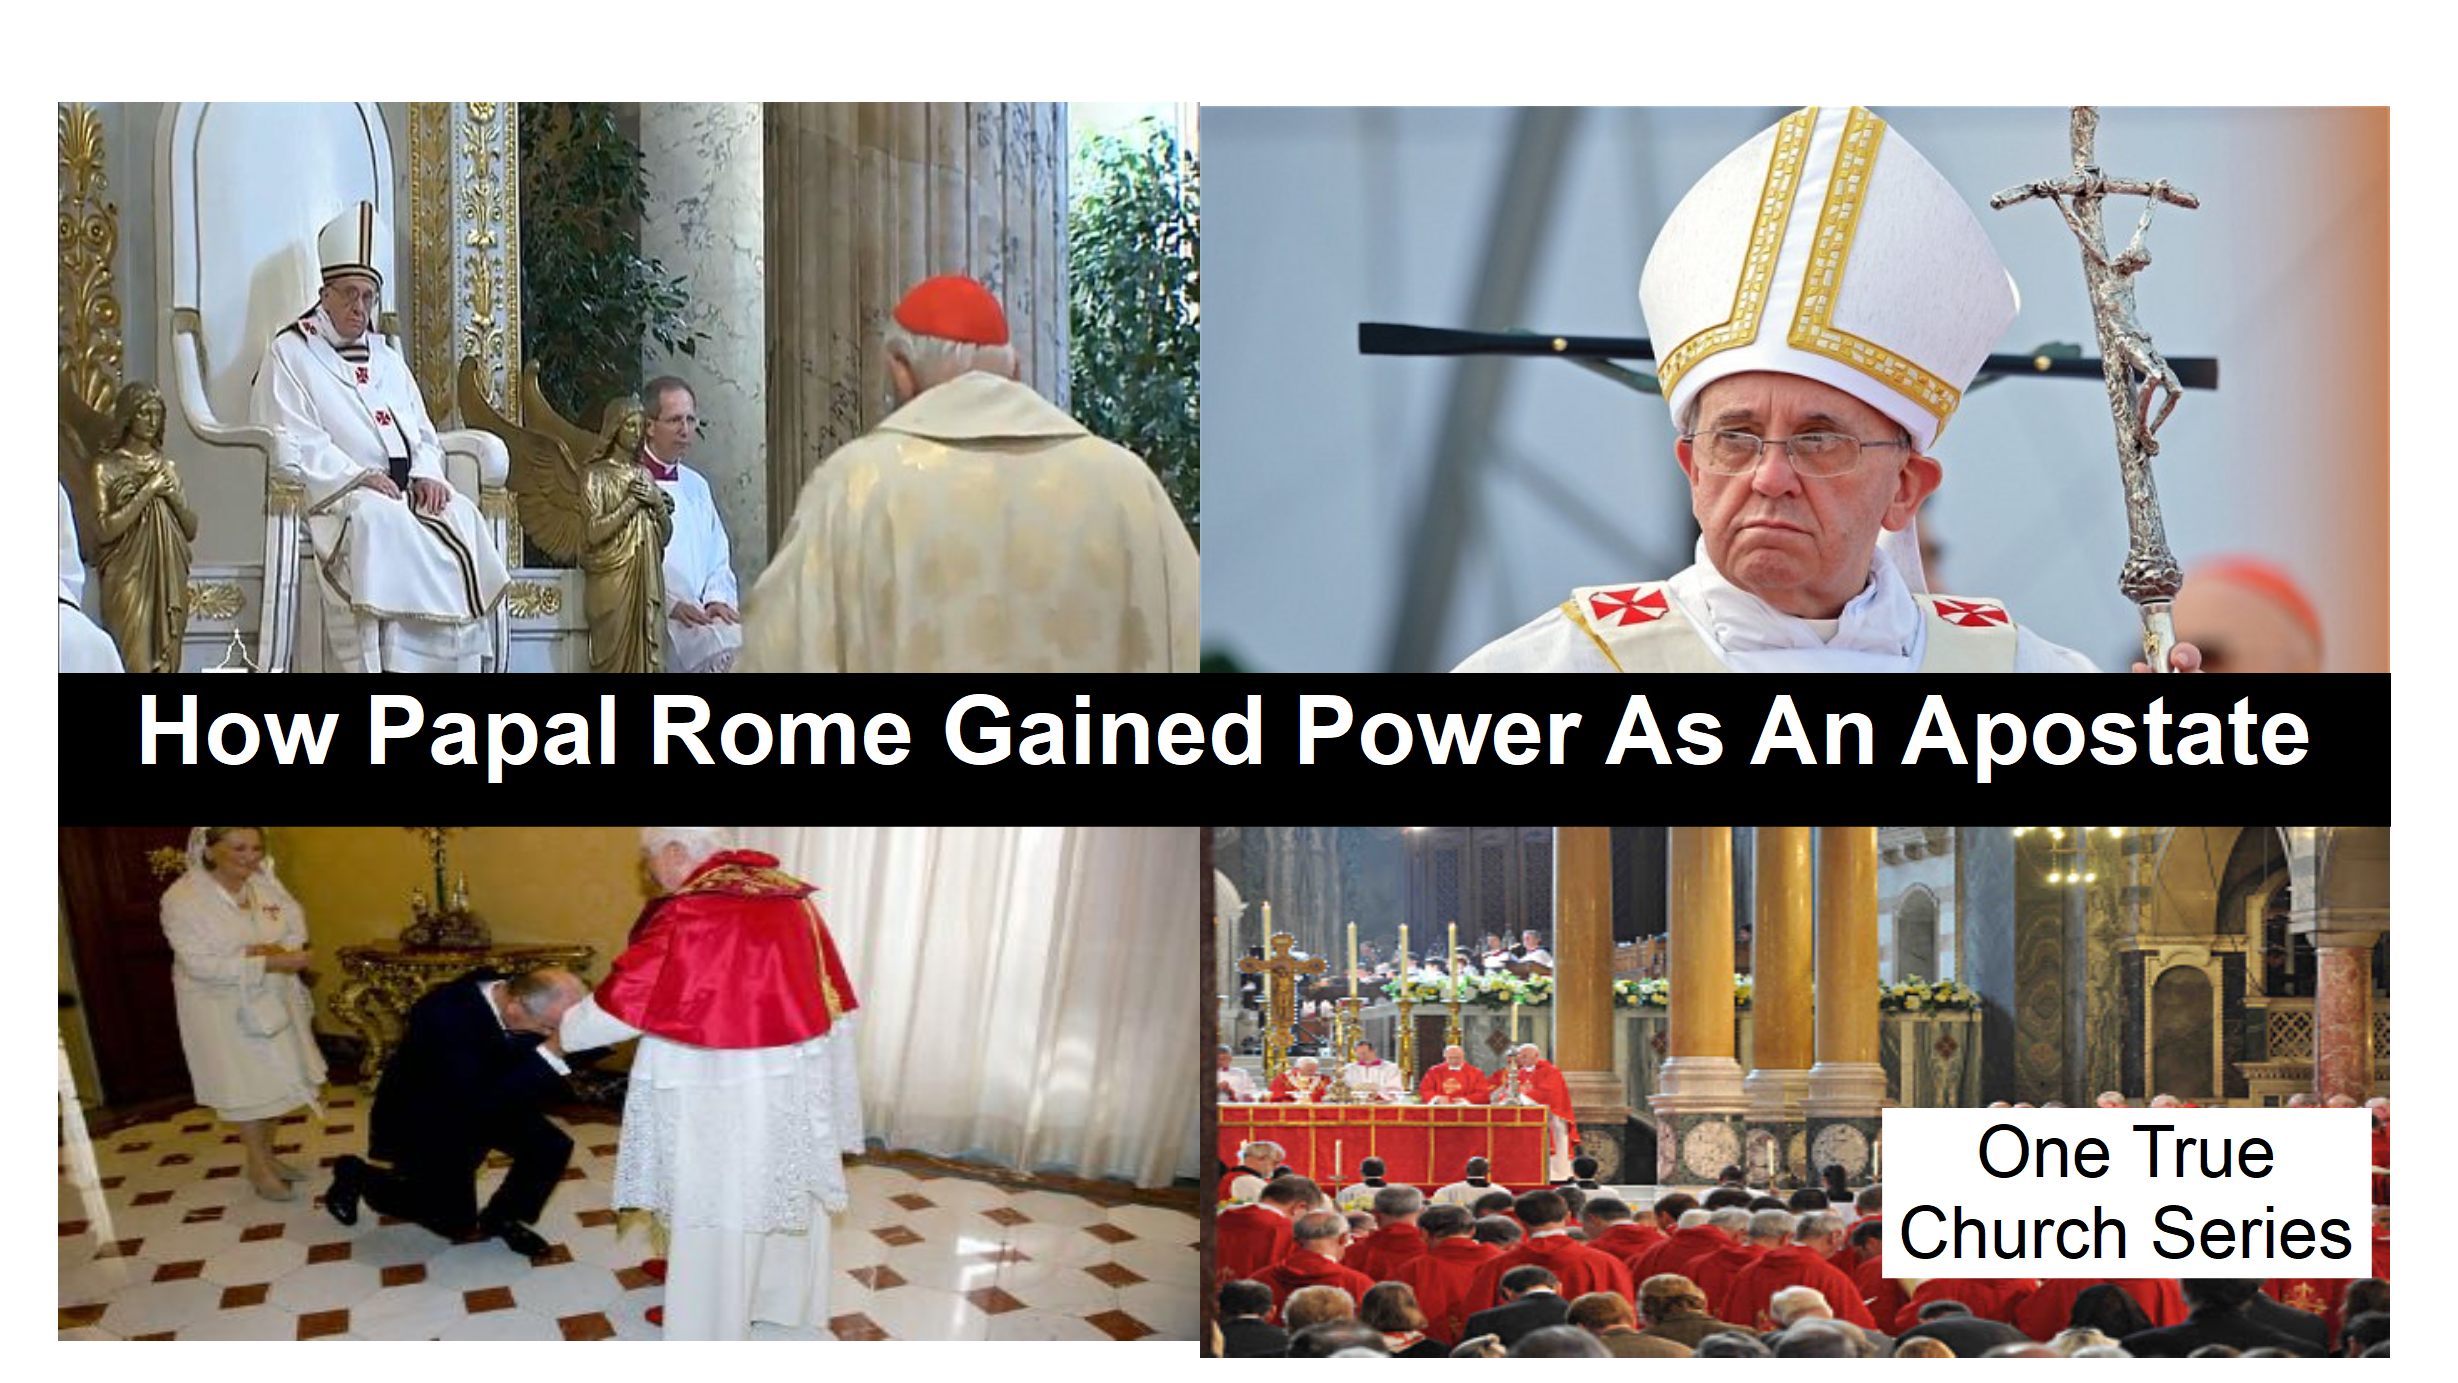 8 How Papal Rome Gained Power As An Apostate